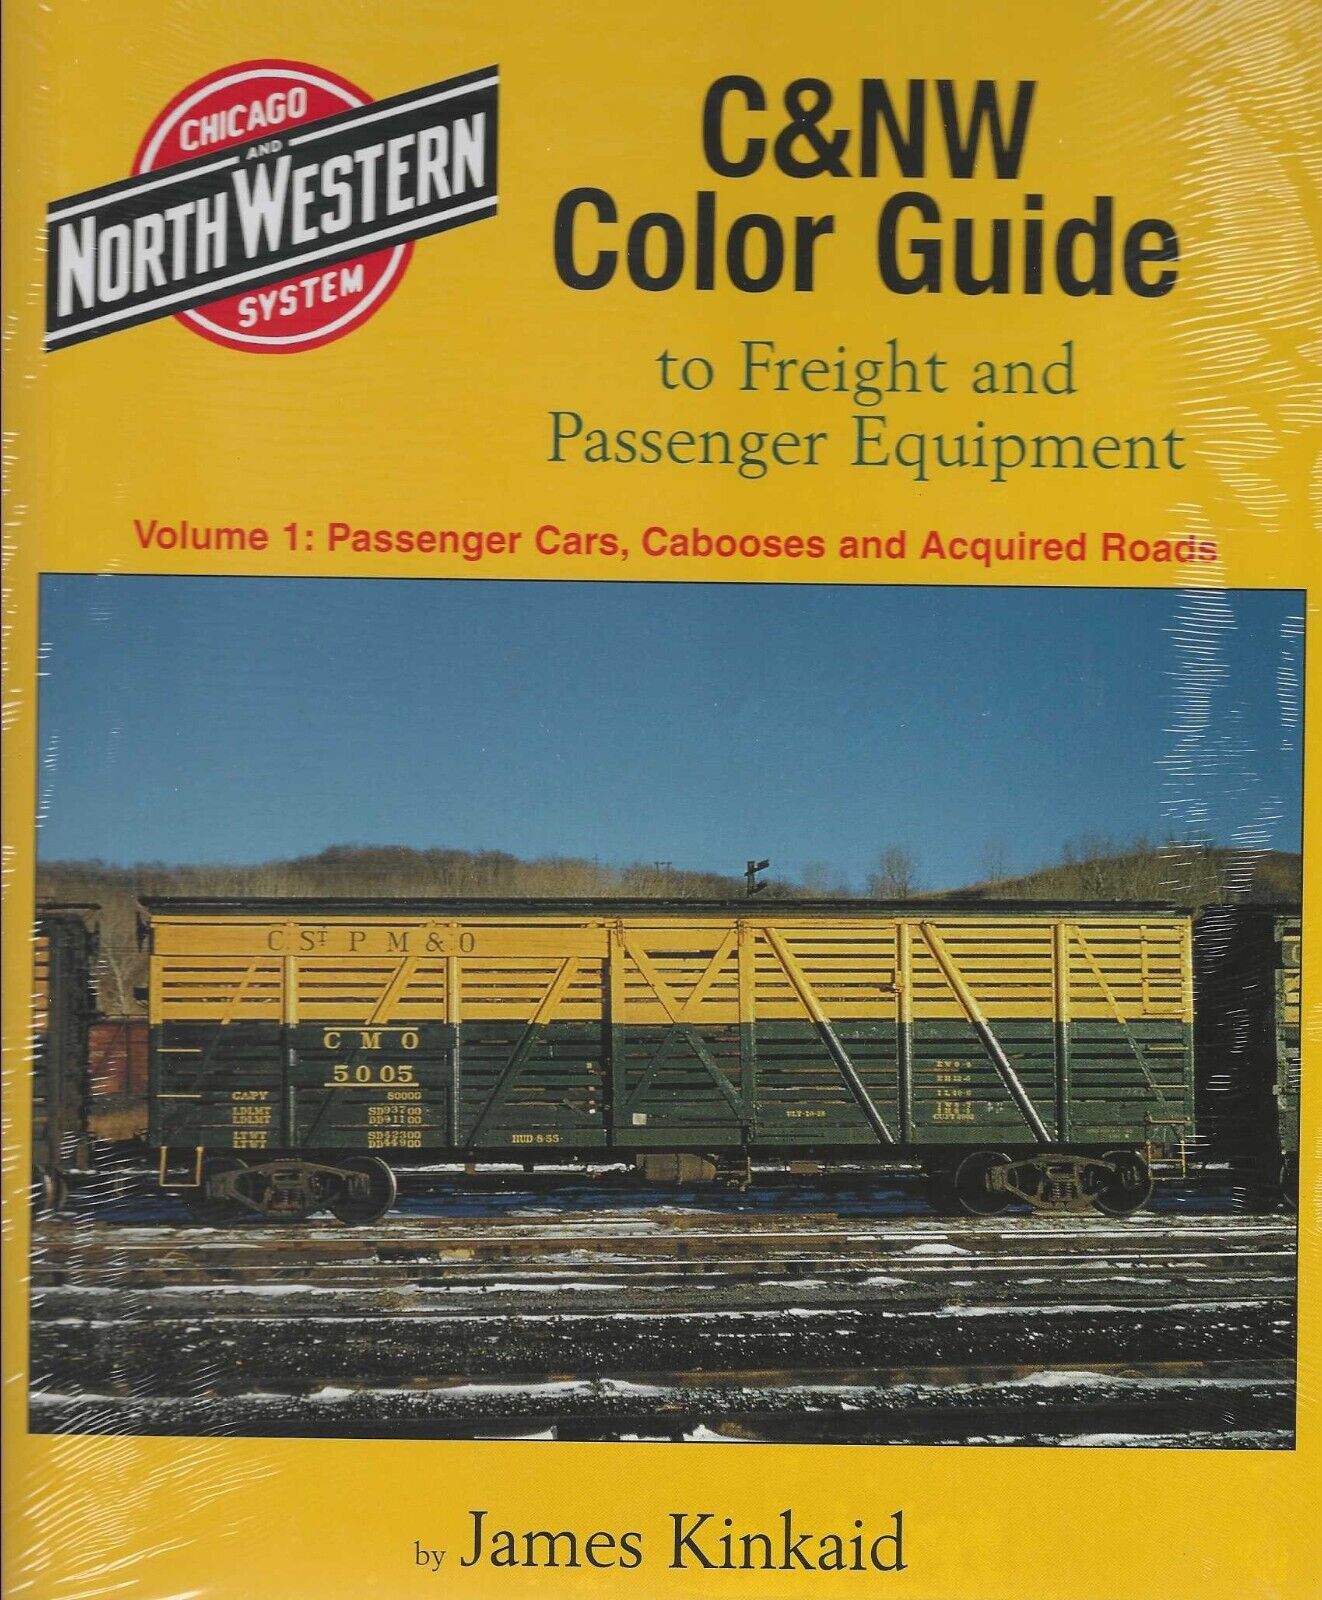 C&NW COLOR GUIDE, Vol. 1: Passenger Cars, Cabooses, Acquired Roads (NEW BOOK)